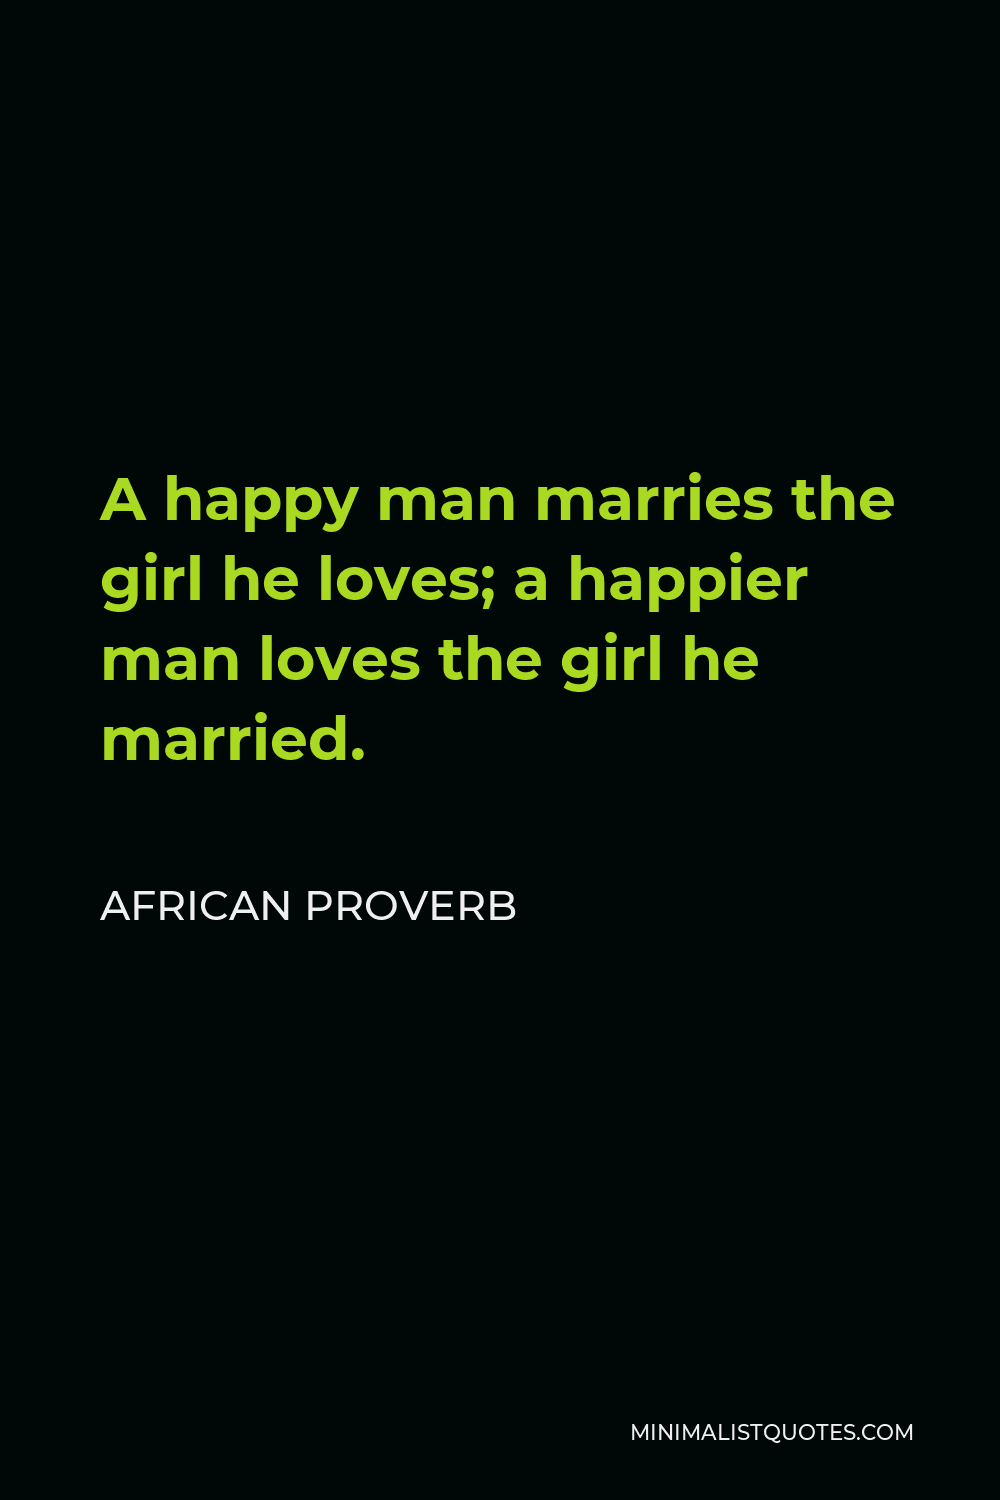 African Proverb Quote - A happy man marries the girl he loves; a happier man loves the girl he married.